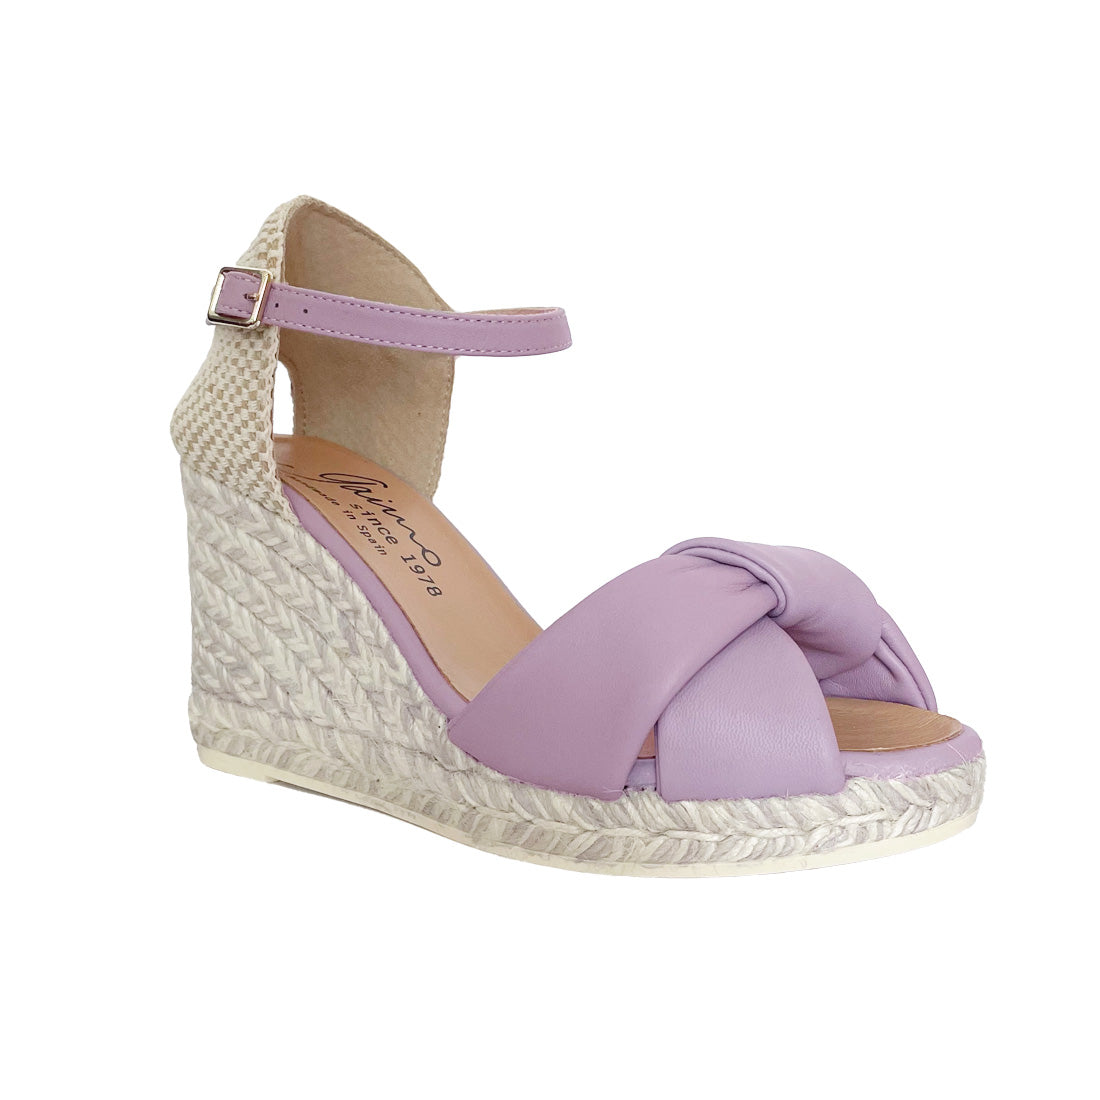 elegant wedges in luxurious calf leather in lilac